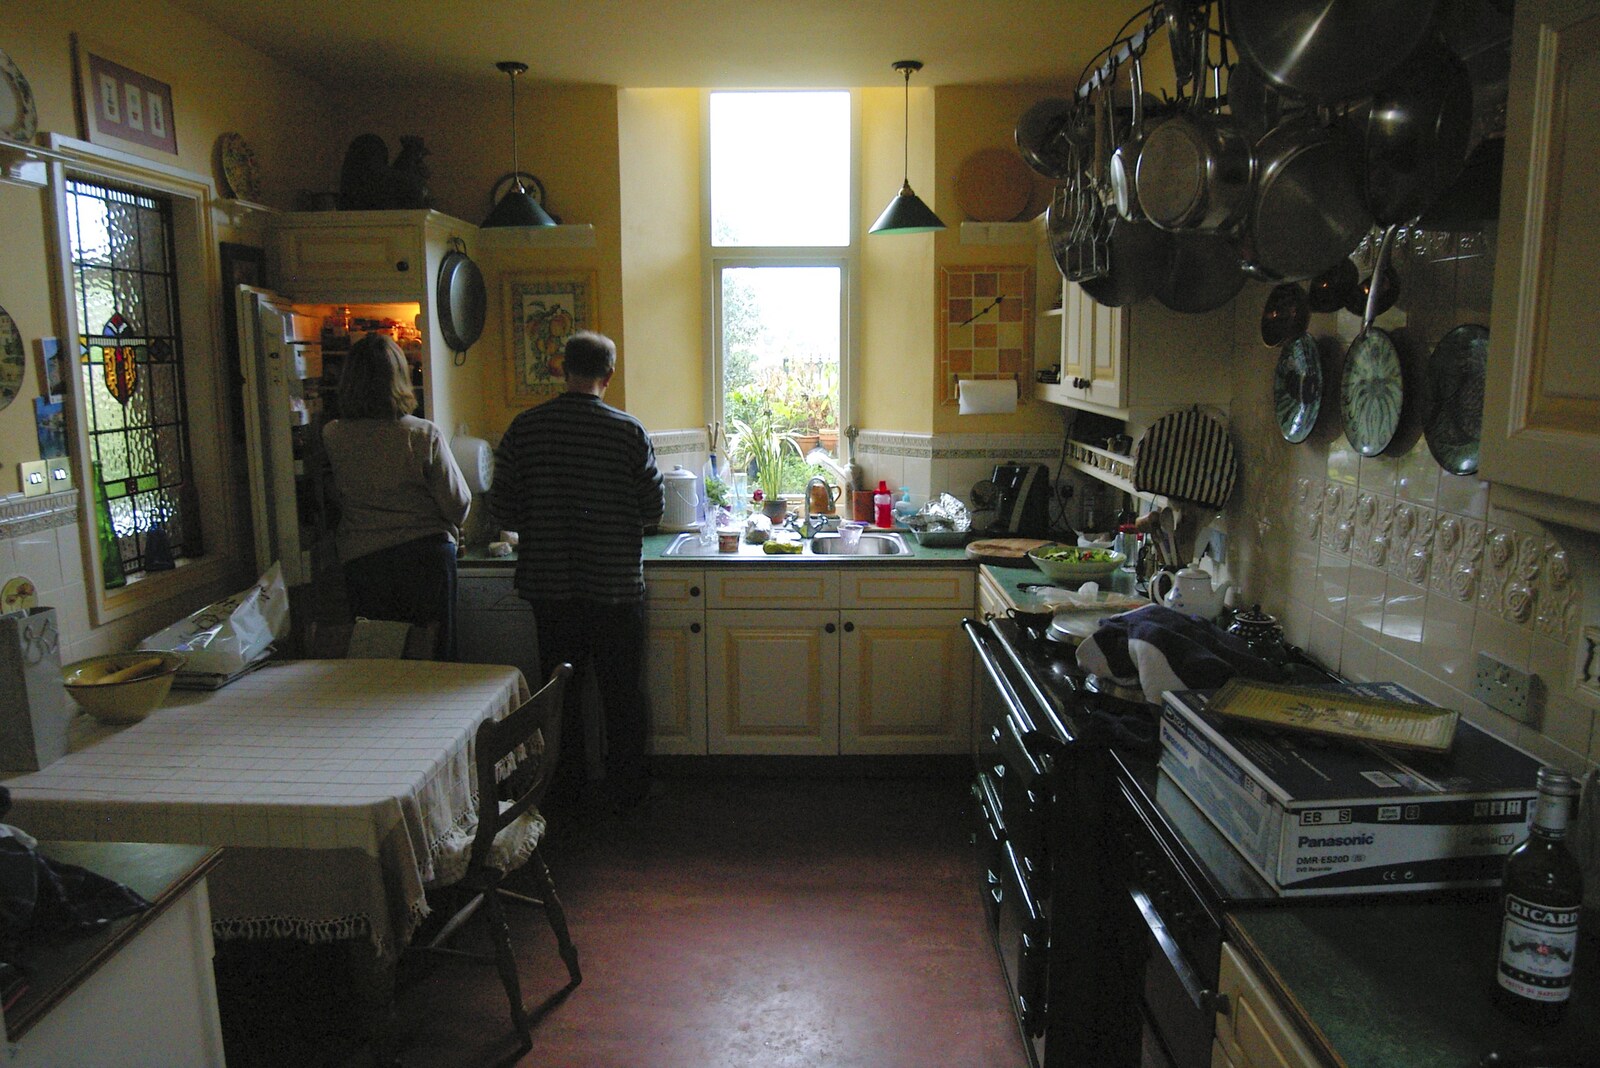 Mother and Mike in the kitchen at The Chapel from A Wander Around Hoo Meavy and Burrator, Dartmoor, Devon - 18th December 2005